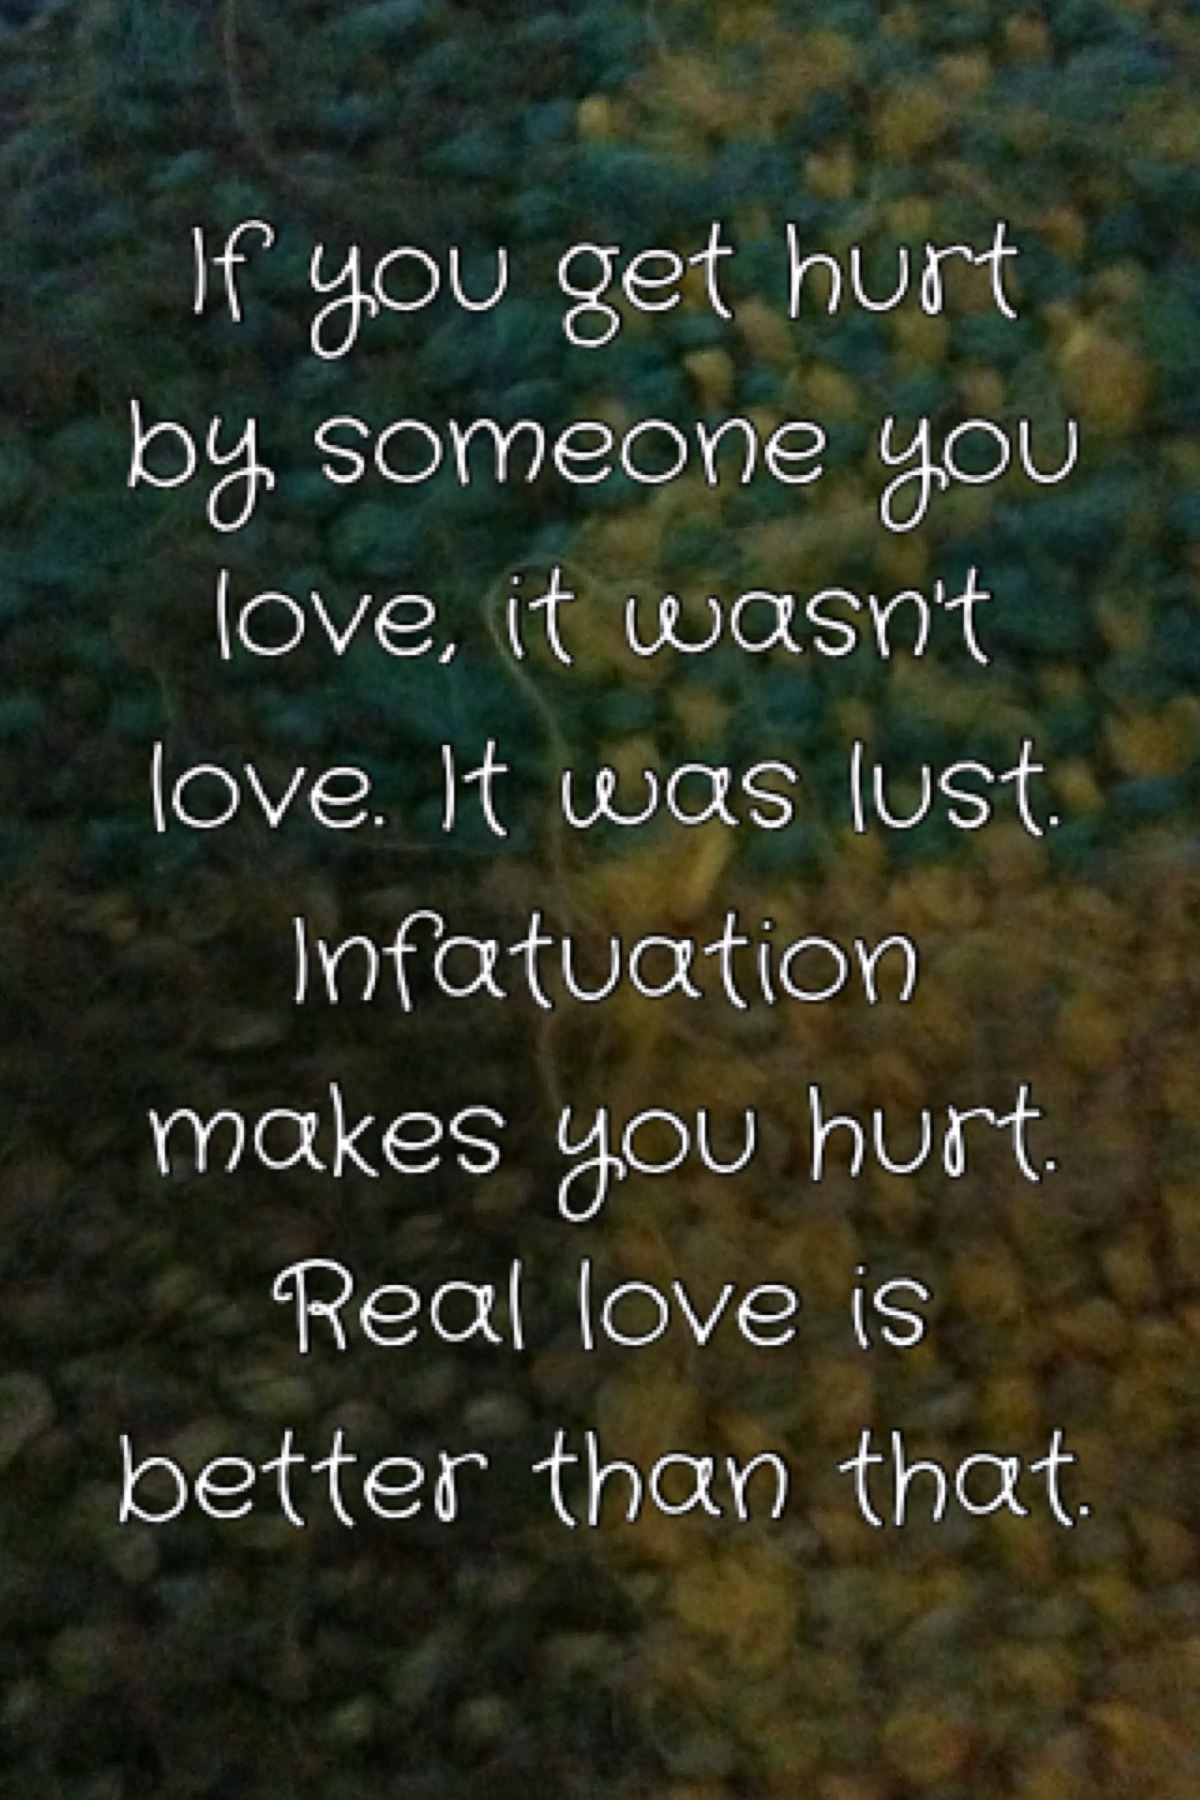 Best Love And Lust Quotes of all time Learn more here 